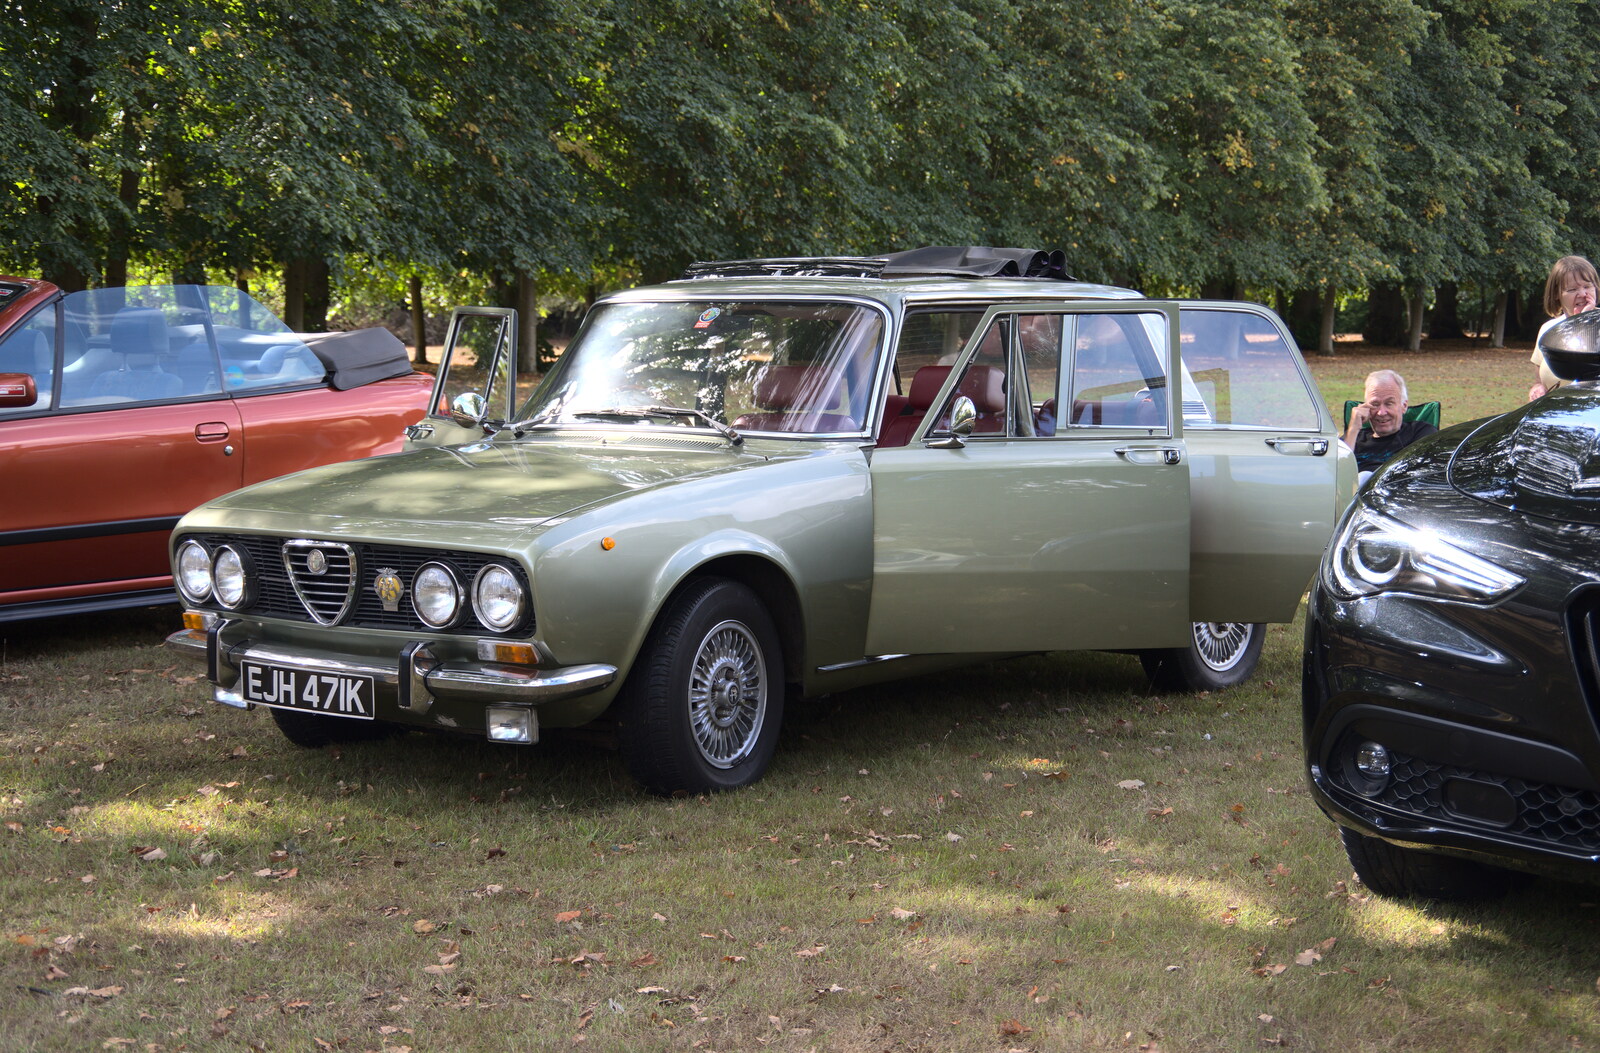 Italian Cars and a Royal Proclamation, Eye, Suffolk - 11th September 2022: Another 1970s car